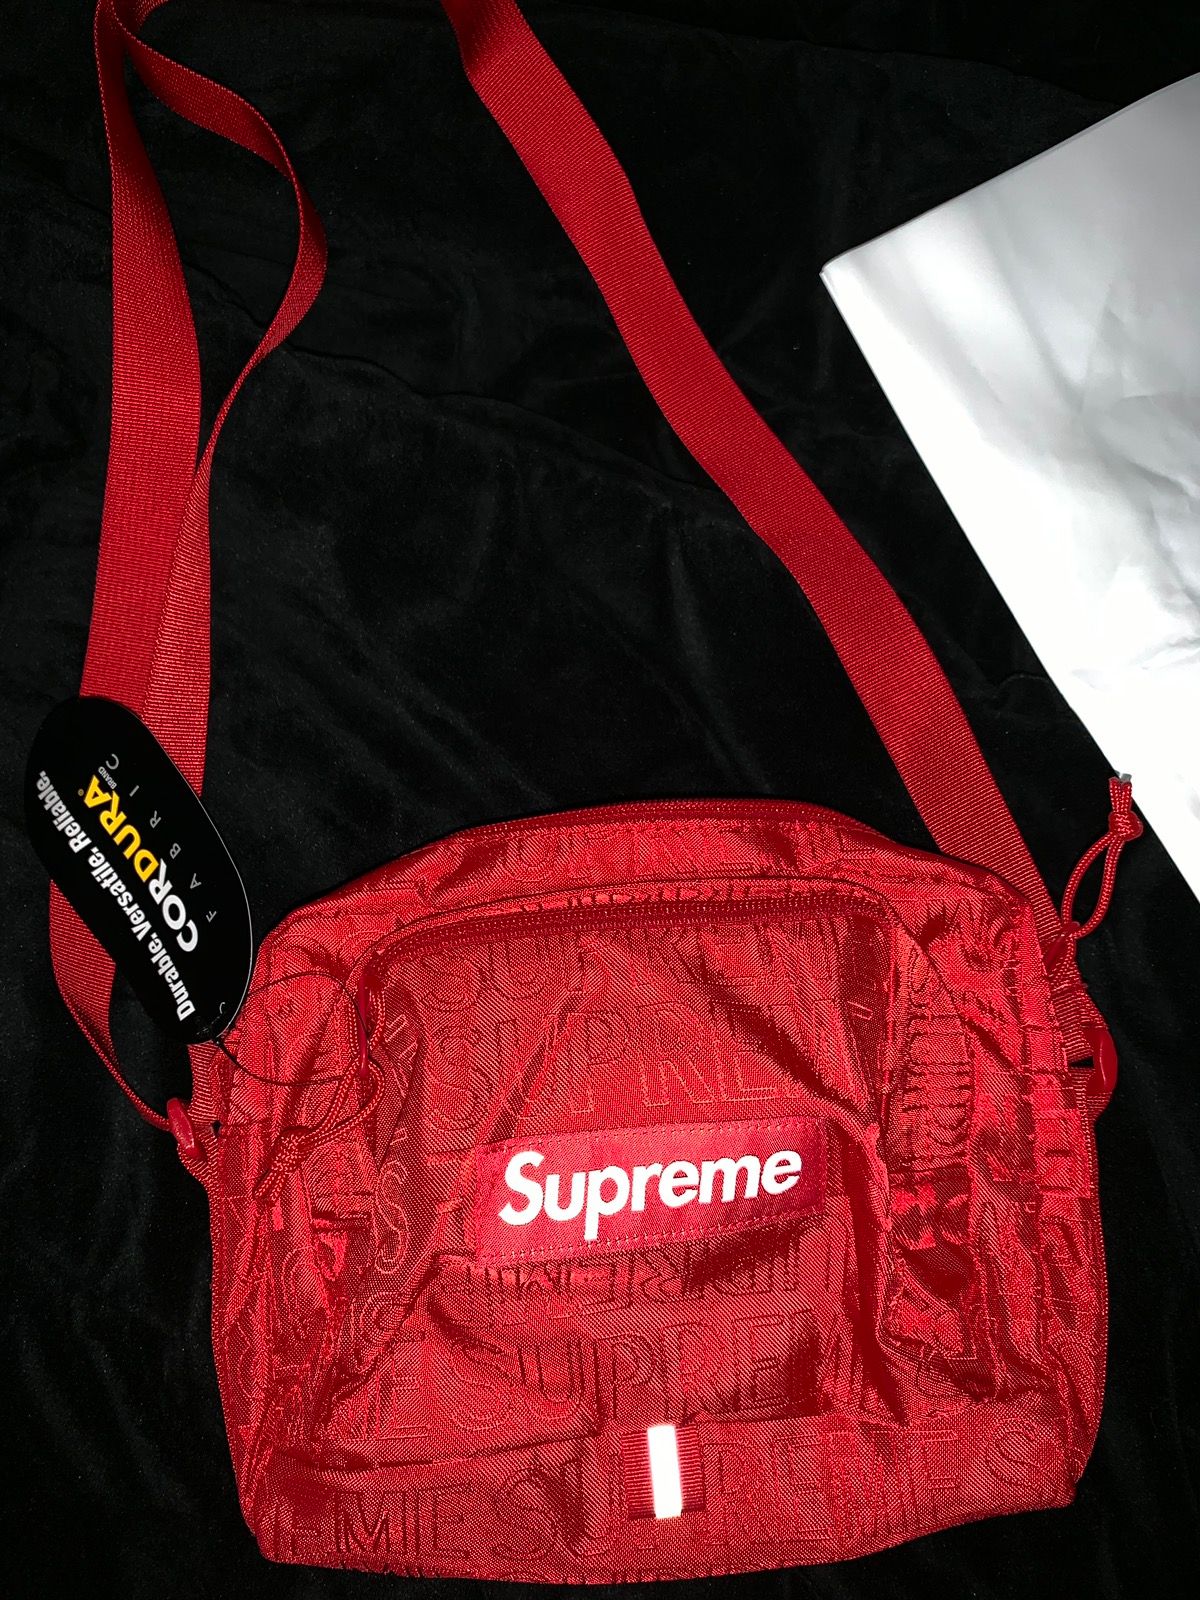 SUPREME SS19 SHOULDER BAG Php 12,500 free shipping 📸Ctto